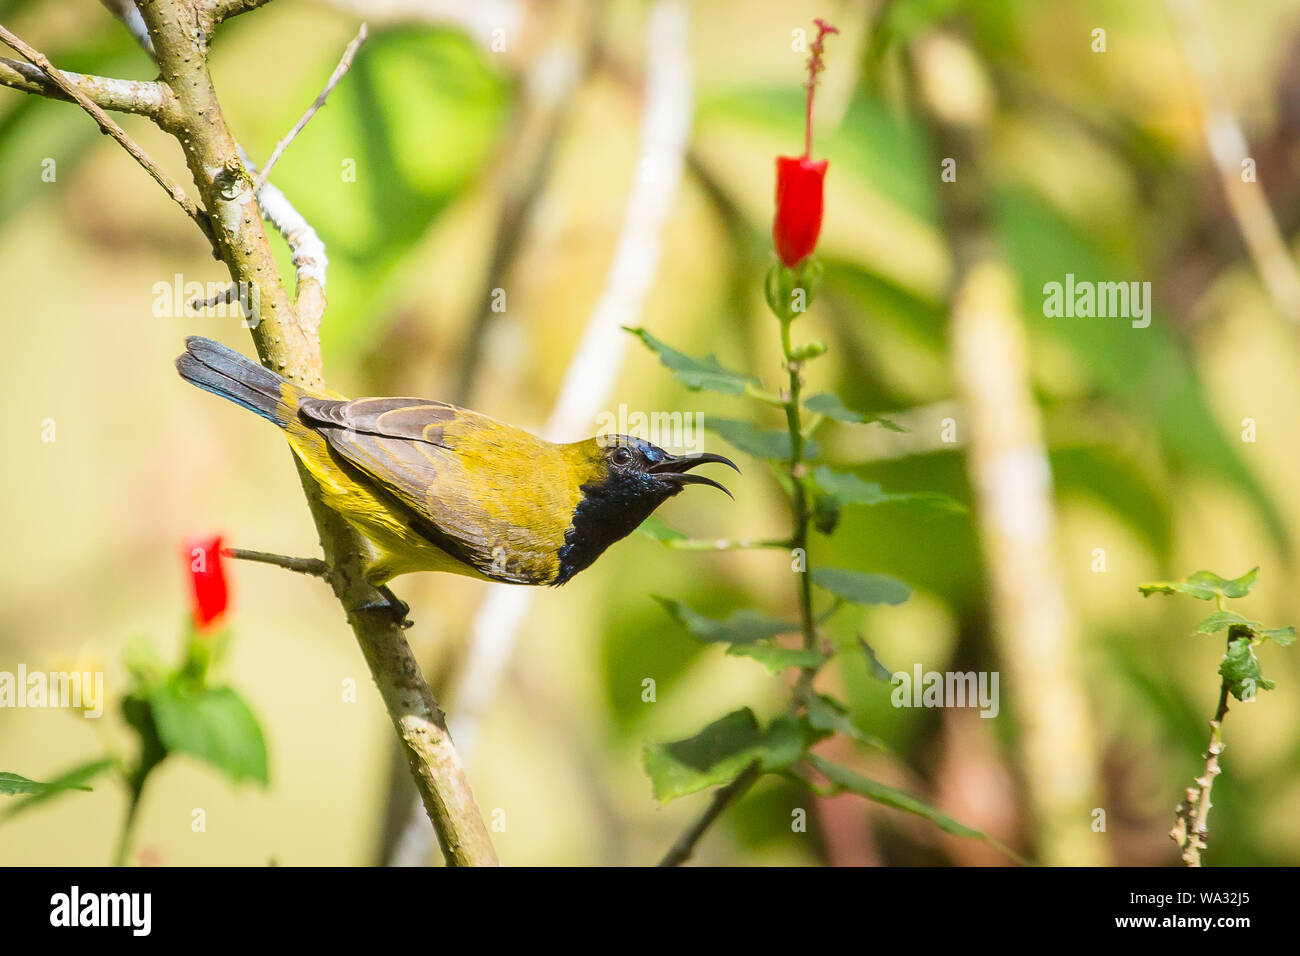 An olive-backed sunbird calls out in the rainforests of Sabah, Malaysian Borneo Stock Photo